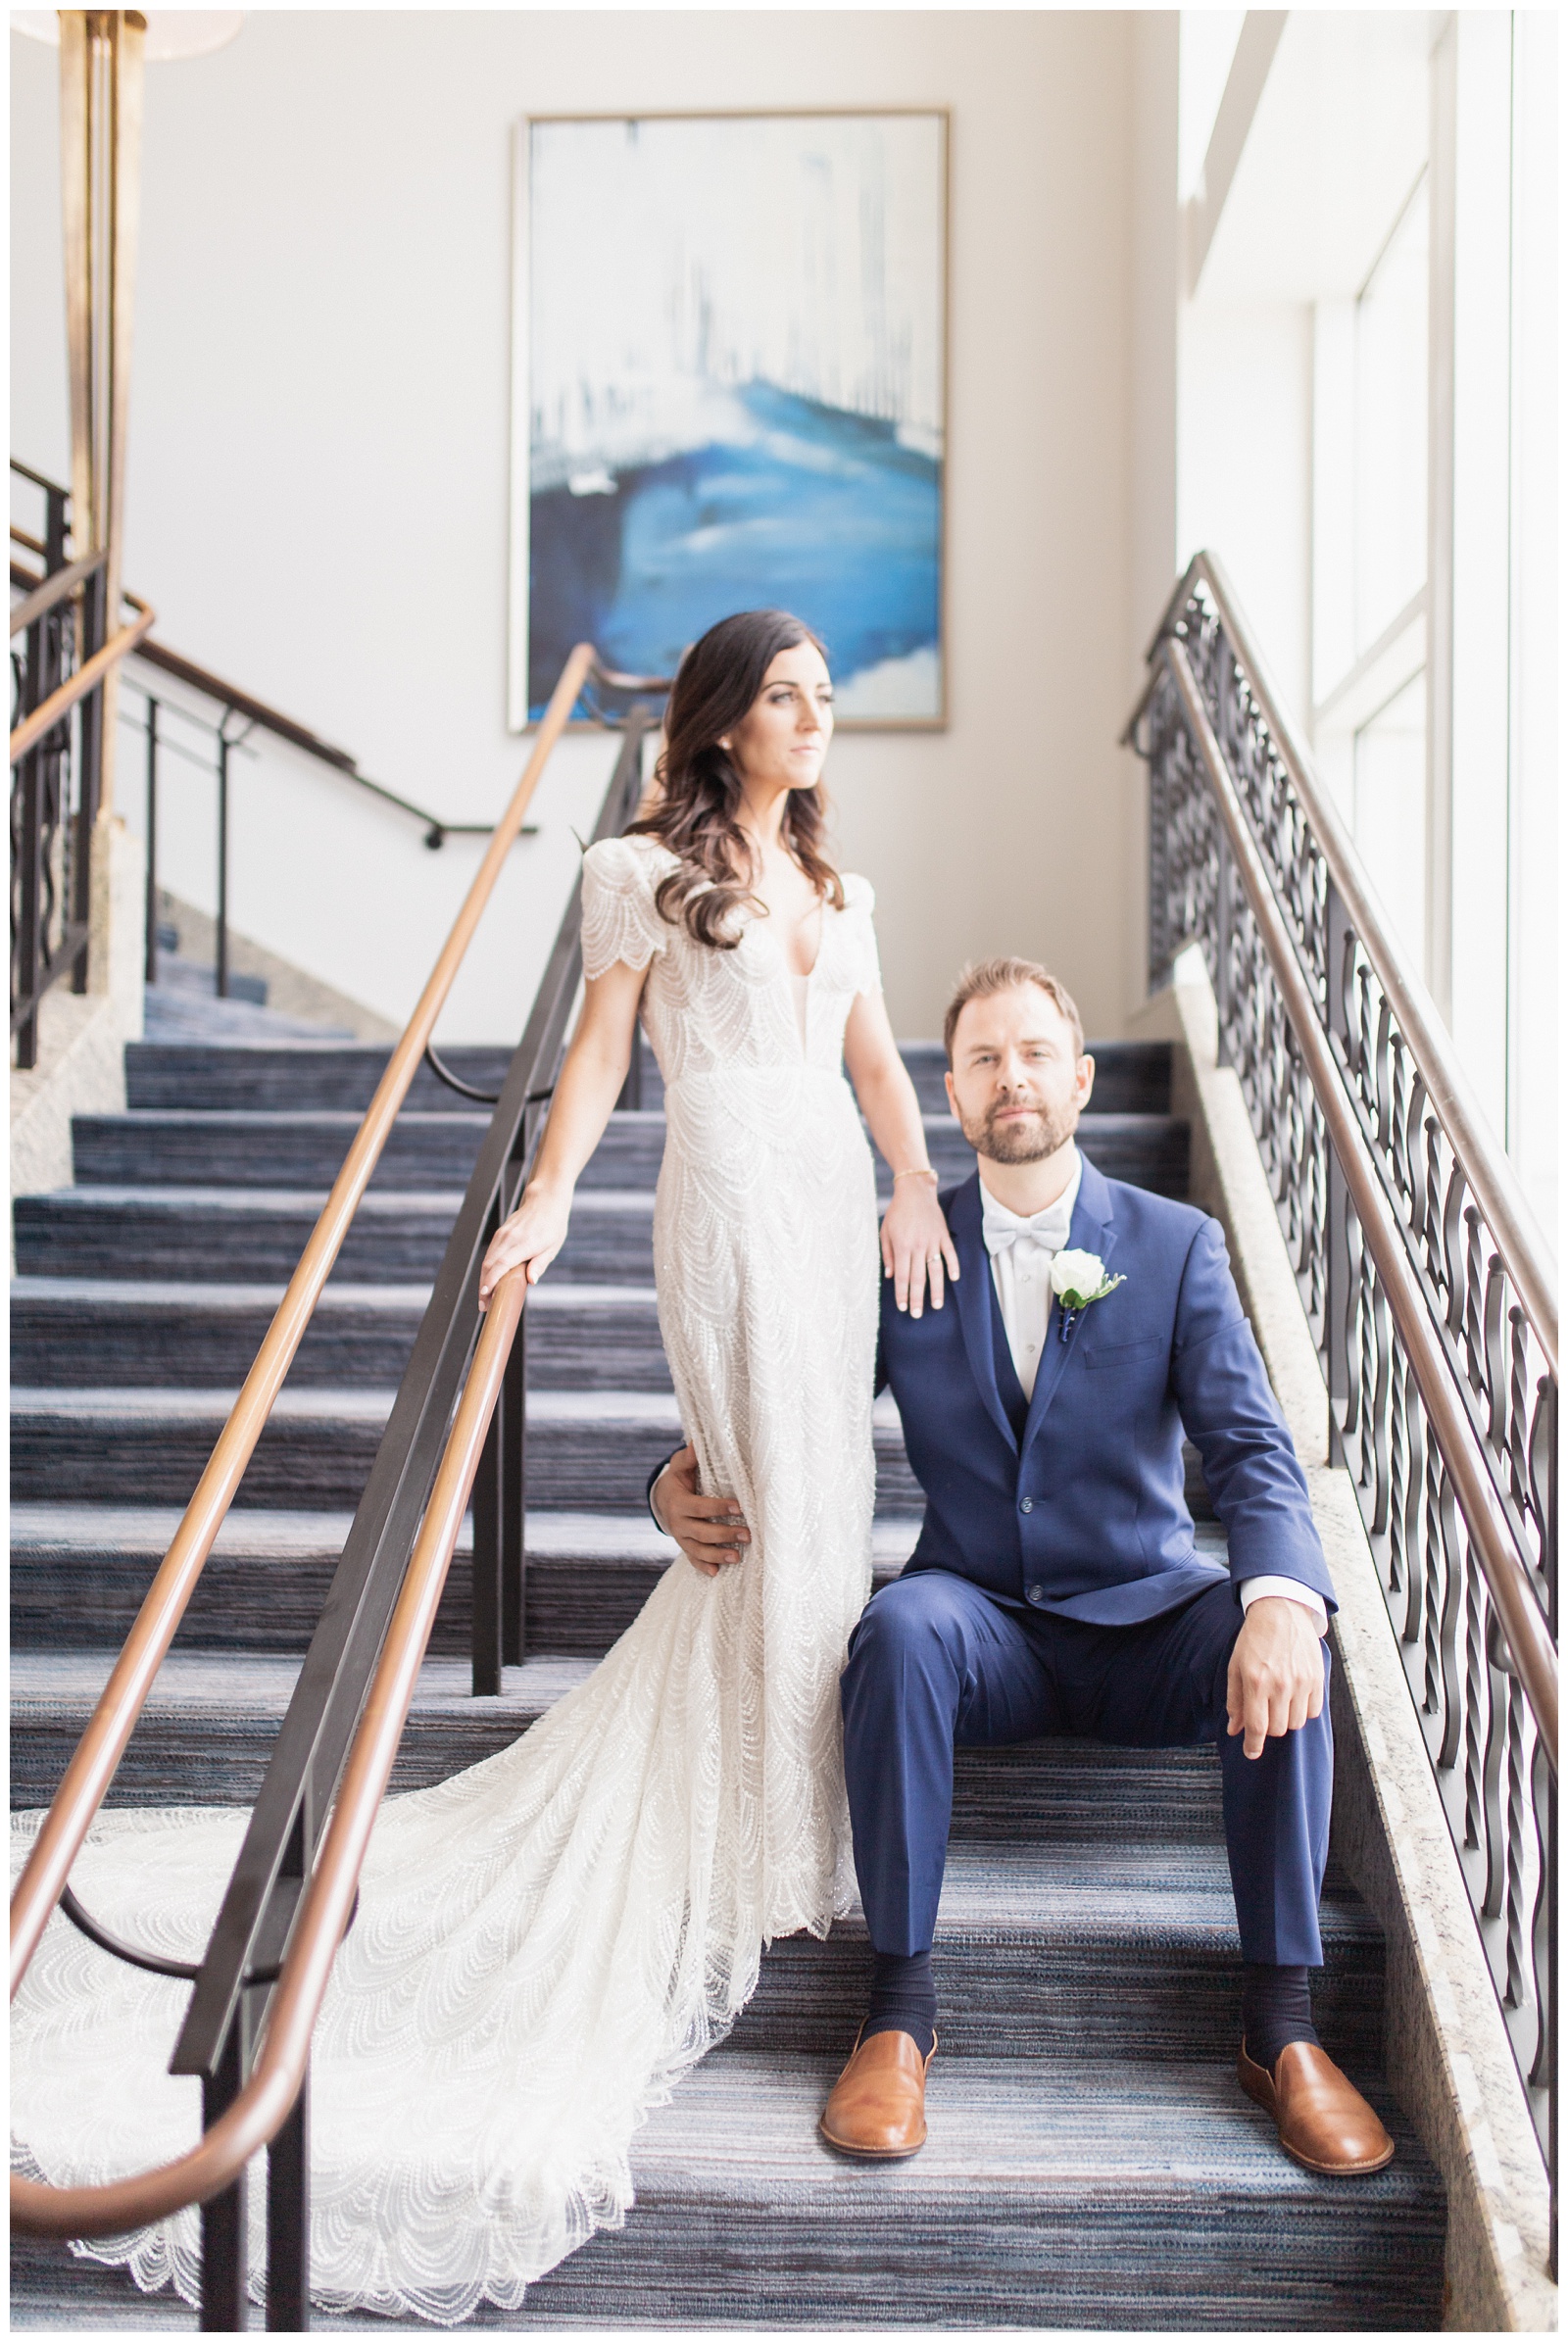 Bride and groom portraits at Tampa Waterside Hotel | Matlock and Kelly Photography